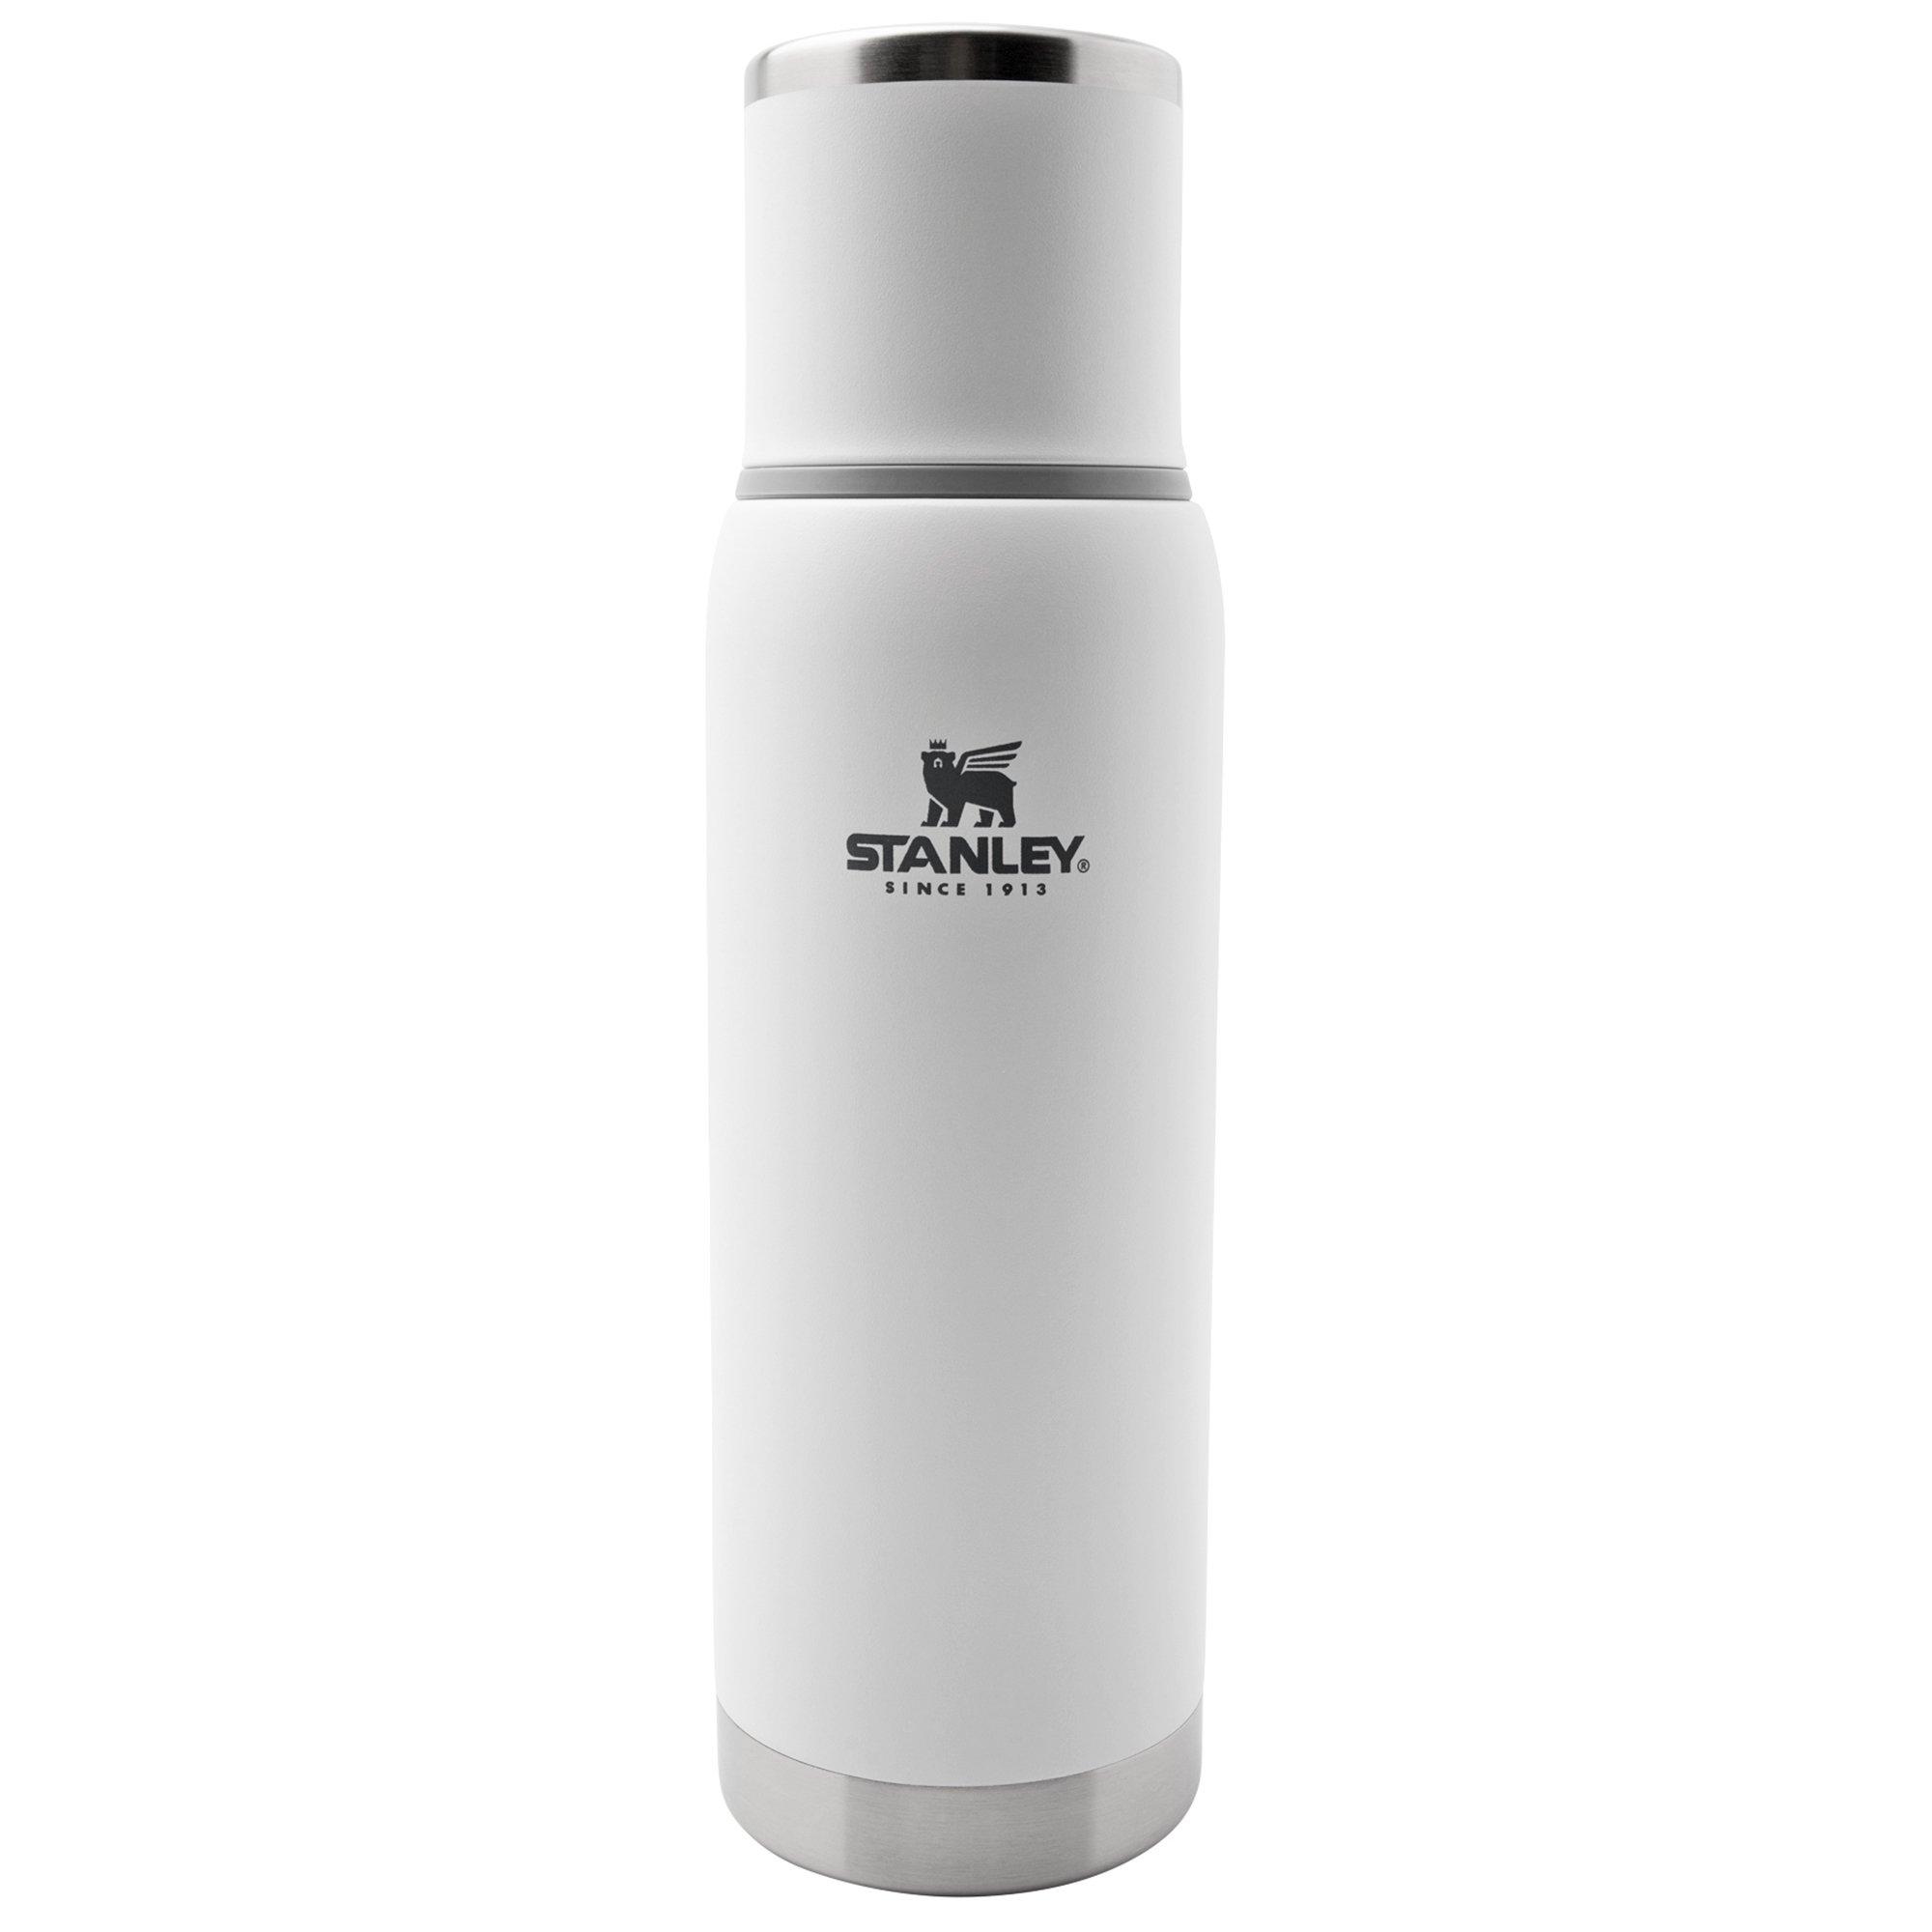 Stanley The Adventure To-Go Bottle 1 L, Black, thermos